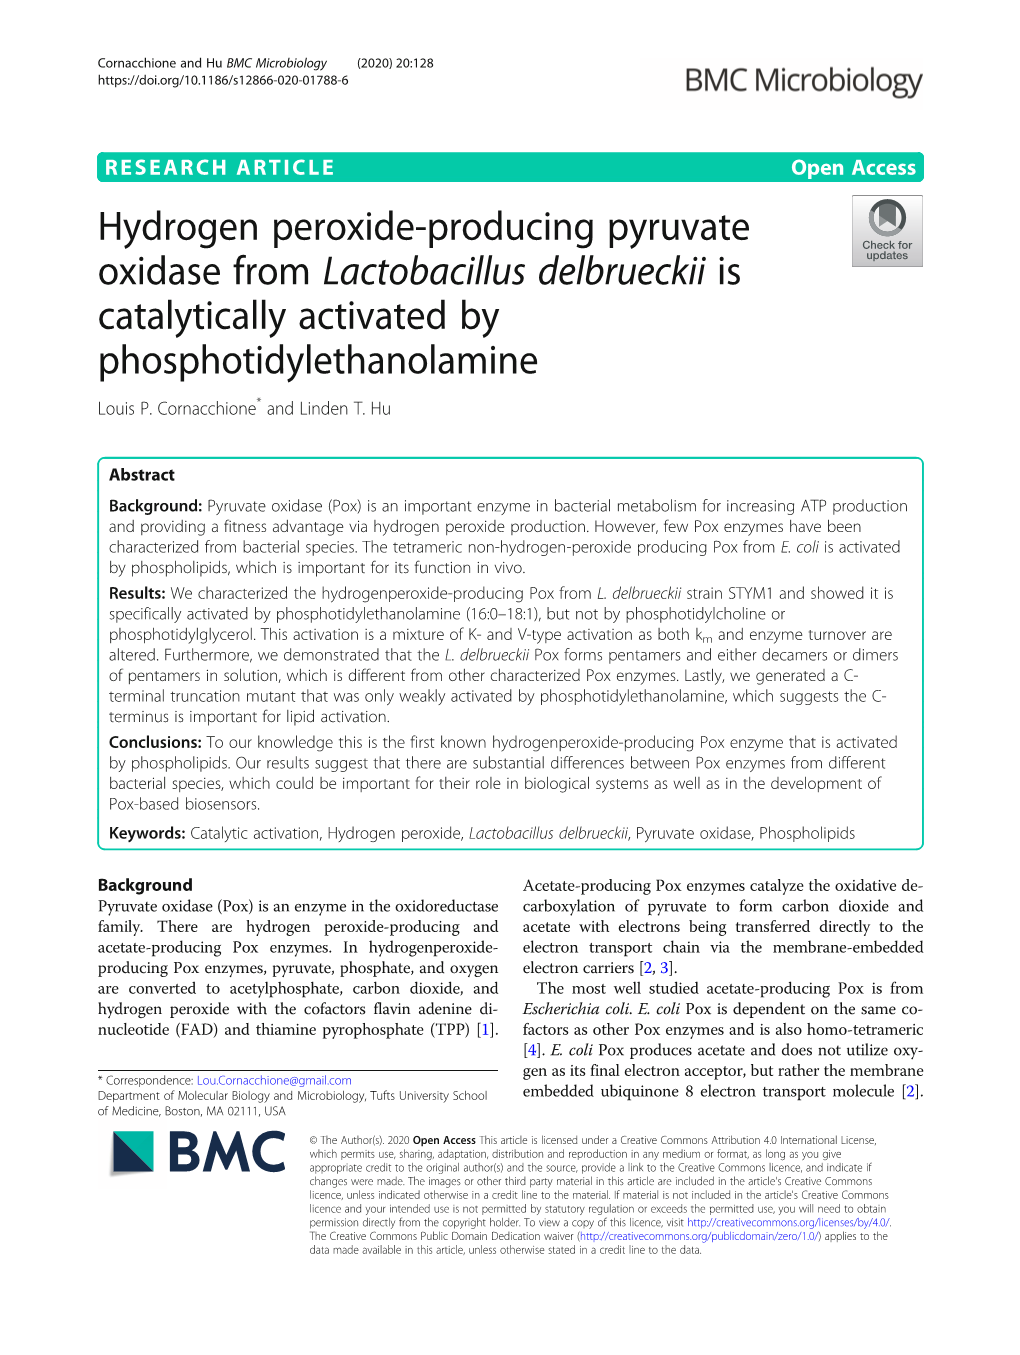 Hydrogen Peroxide-Producing Pyruvate Oxidase from Lactobacillus Delbrueckii Is Catalytically Activated by Phosphotidylethanolamine Louis P